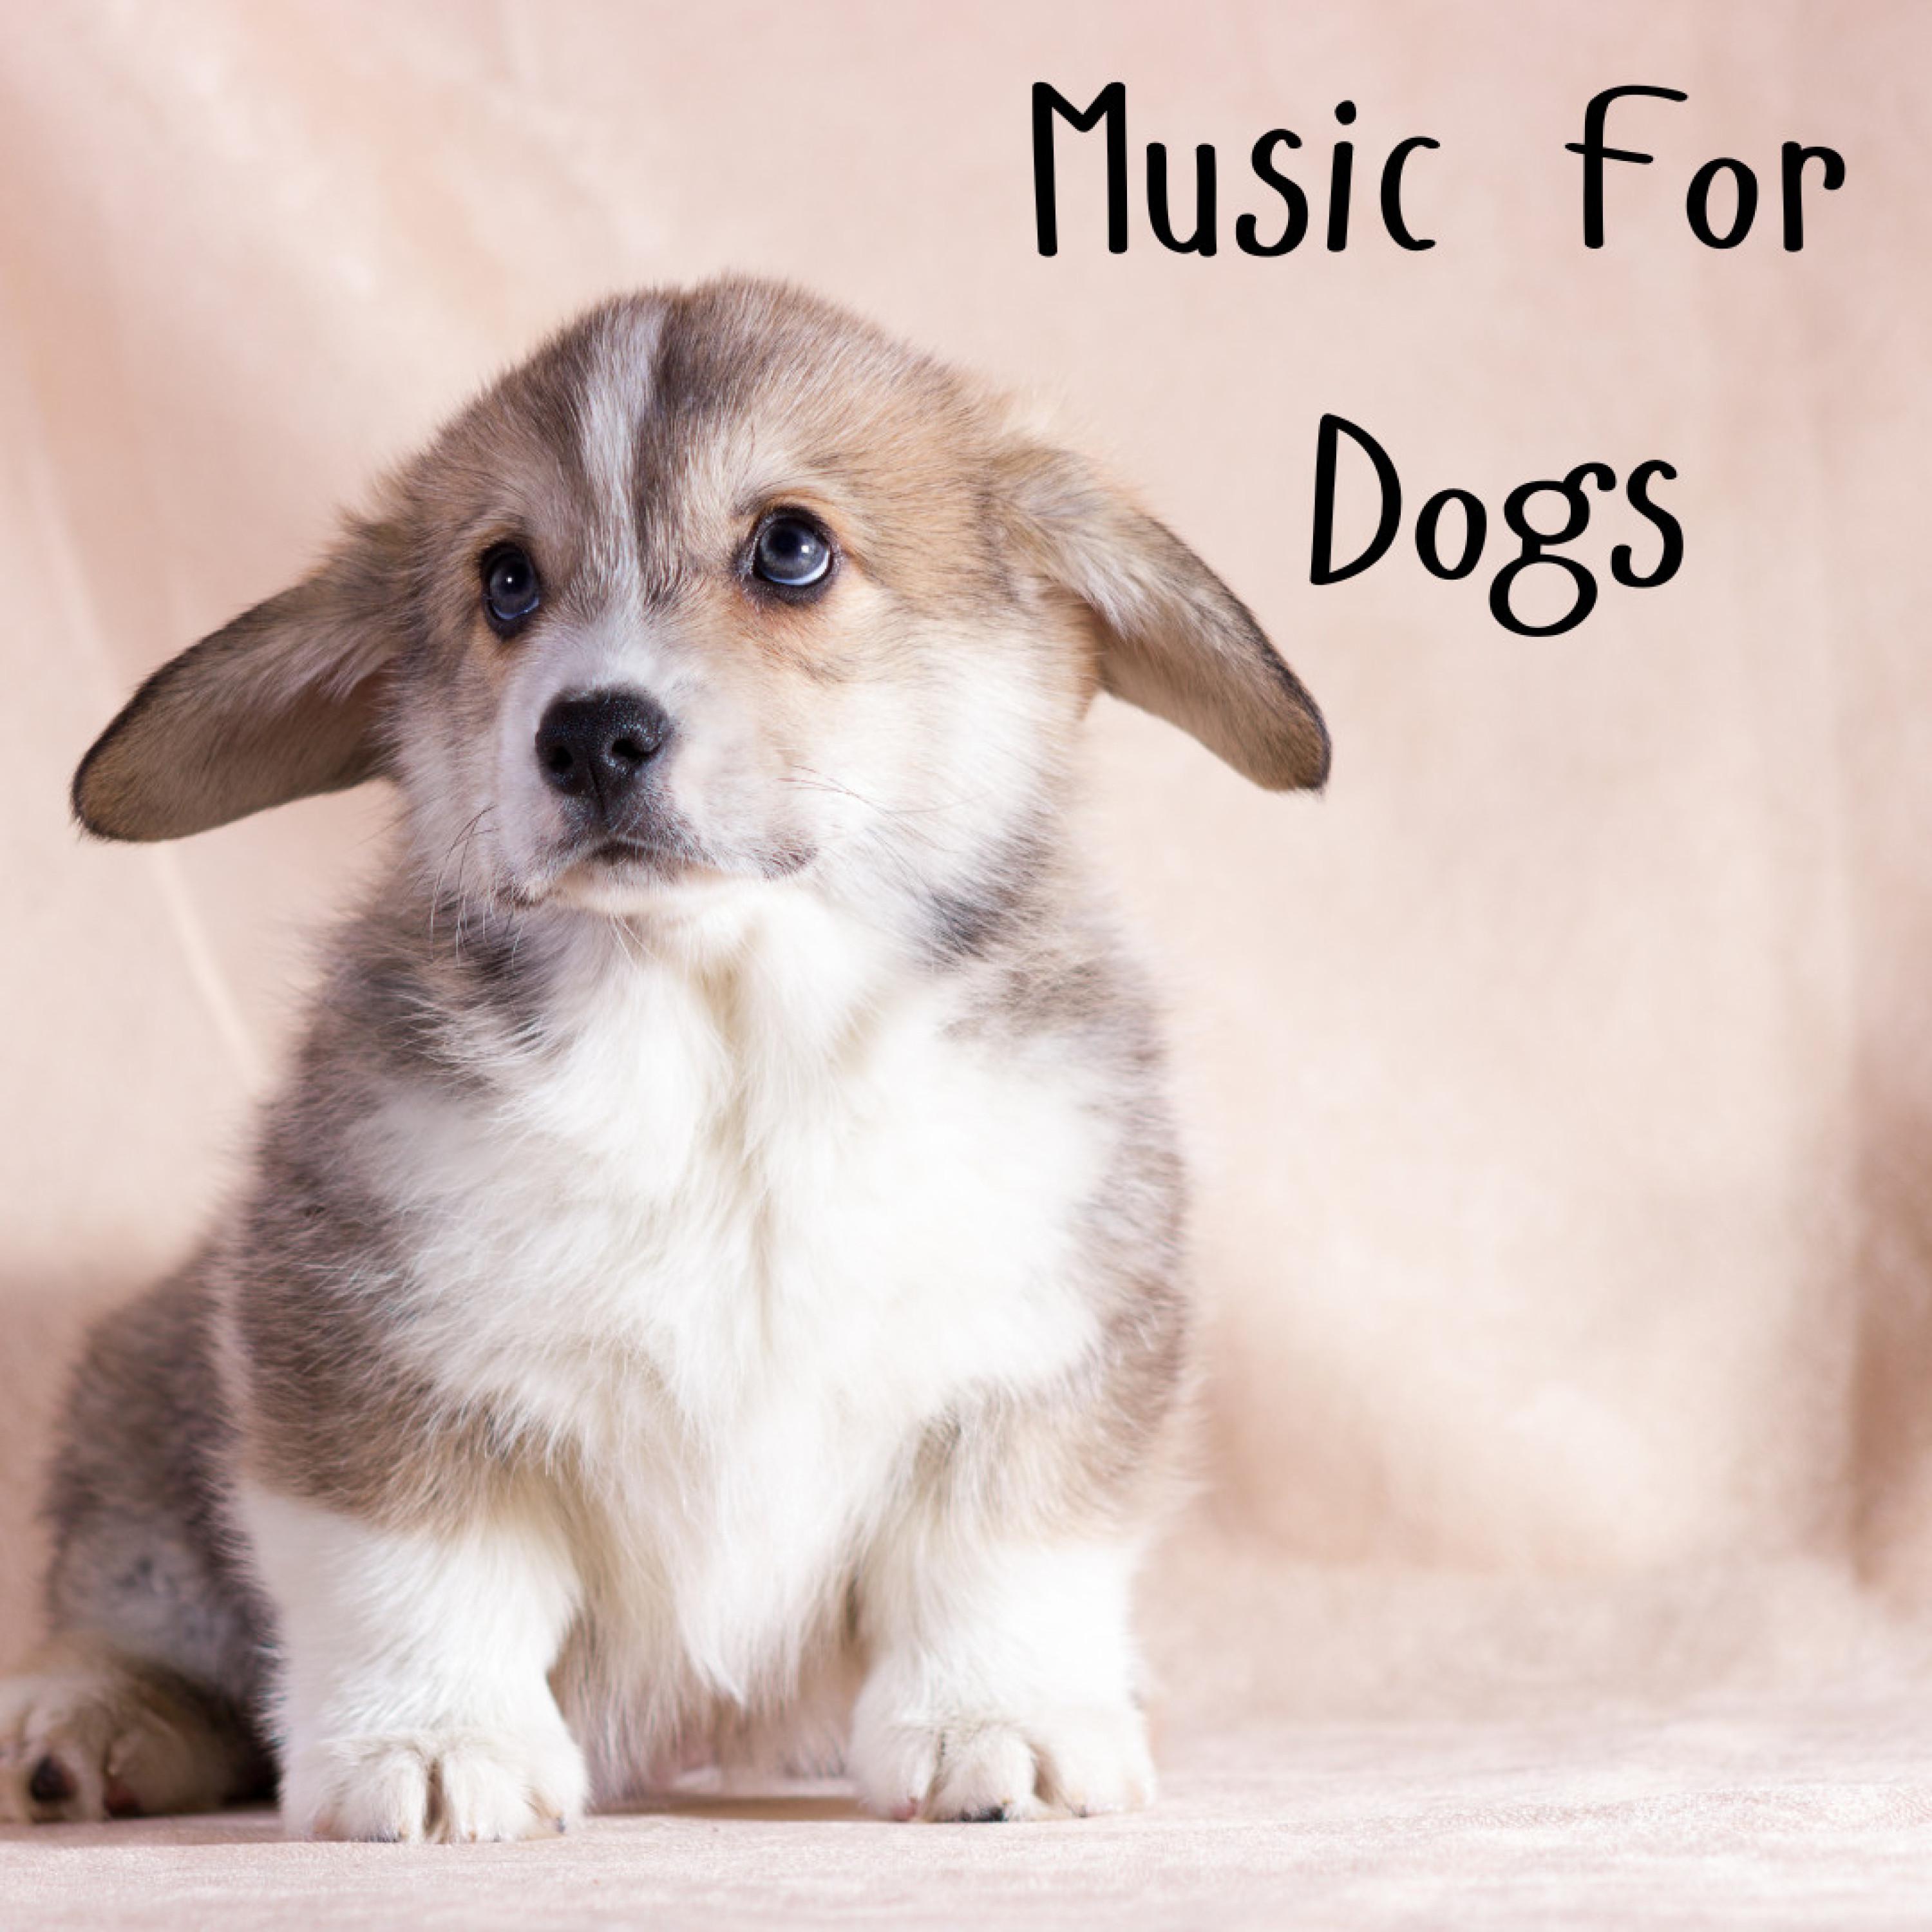 Music For Dogs - Piano Instrumental for Dogs